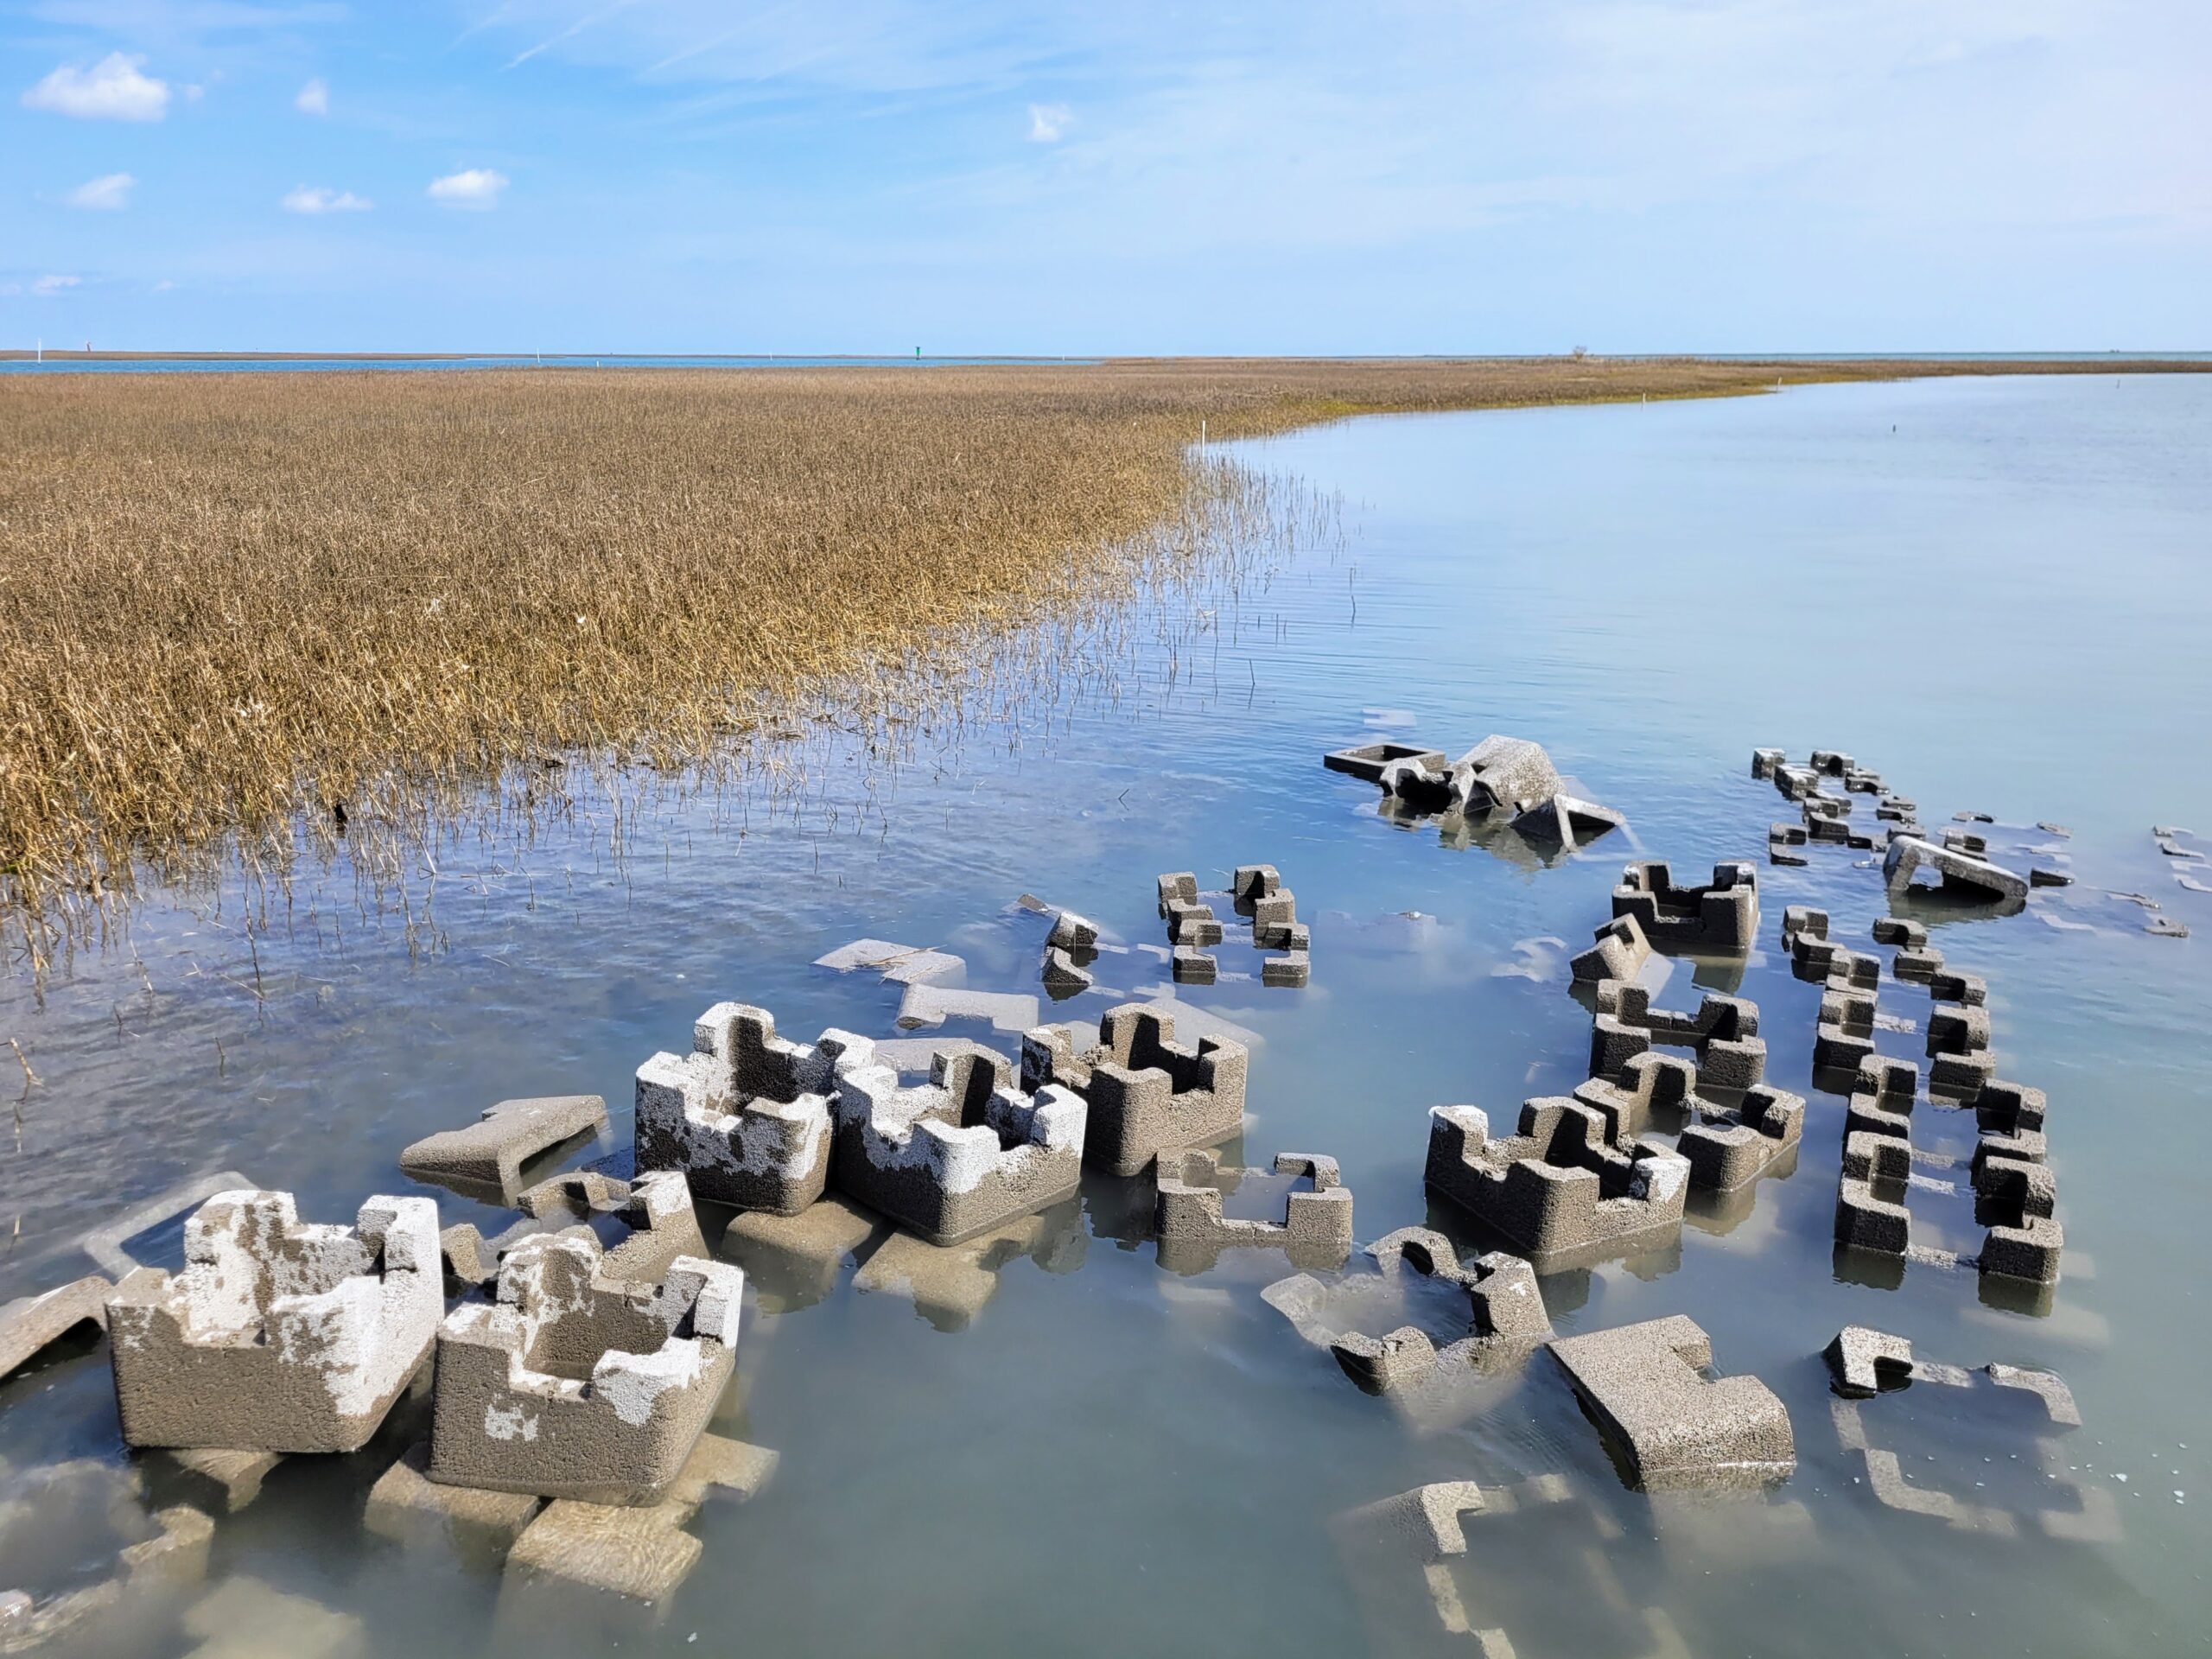 concrete oyster catcher blocks sit in shallow water next to a salt marsh